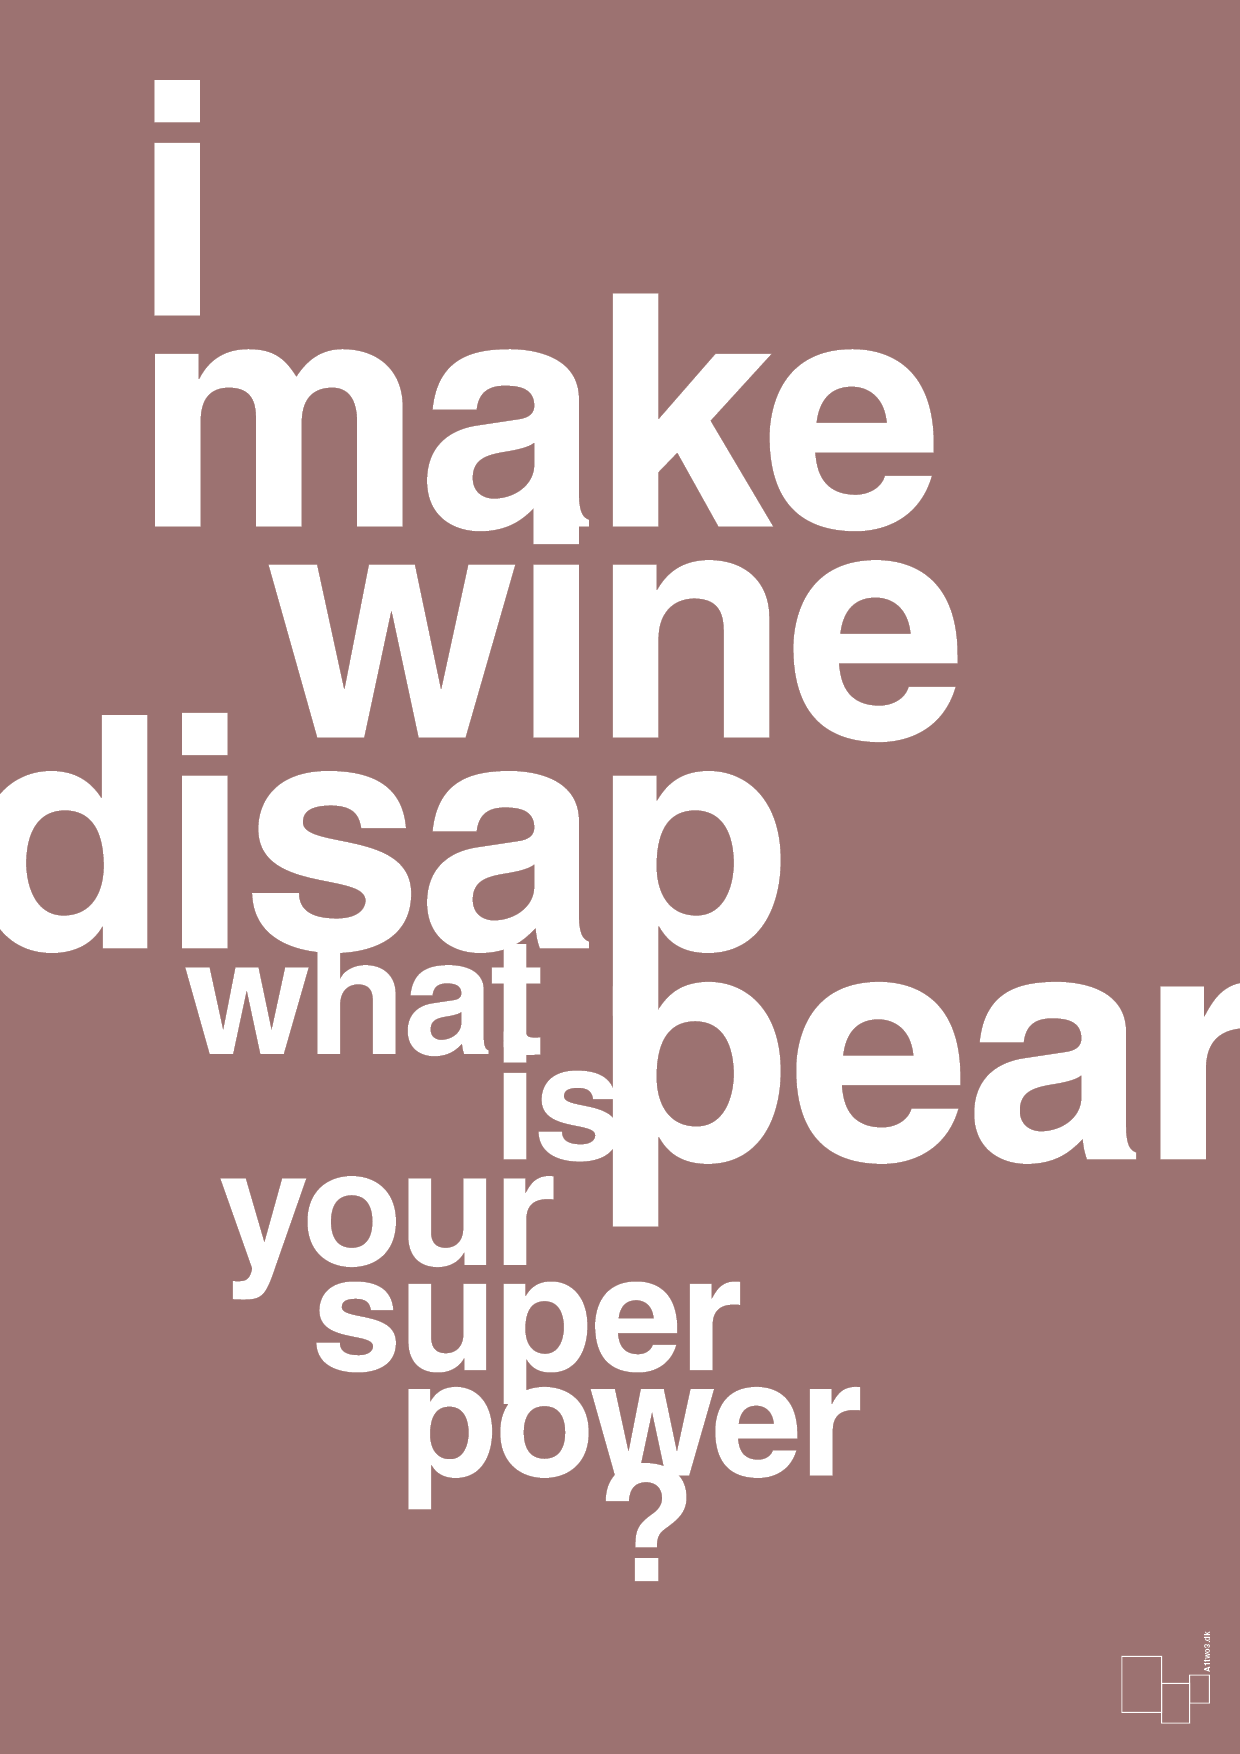 i make wine disappear what is your super power - Plakat med Mad & Drikke i Plum